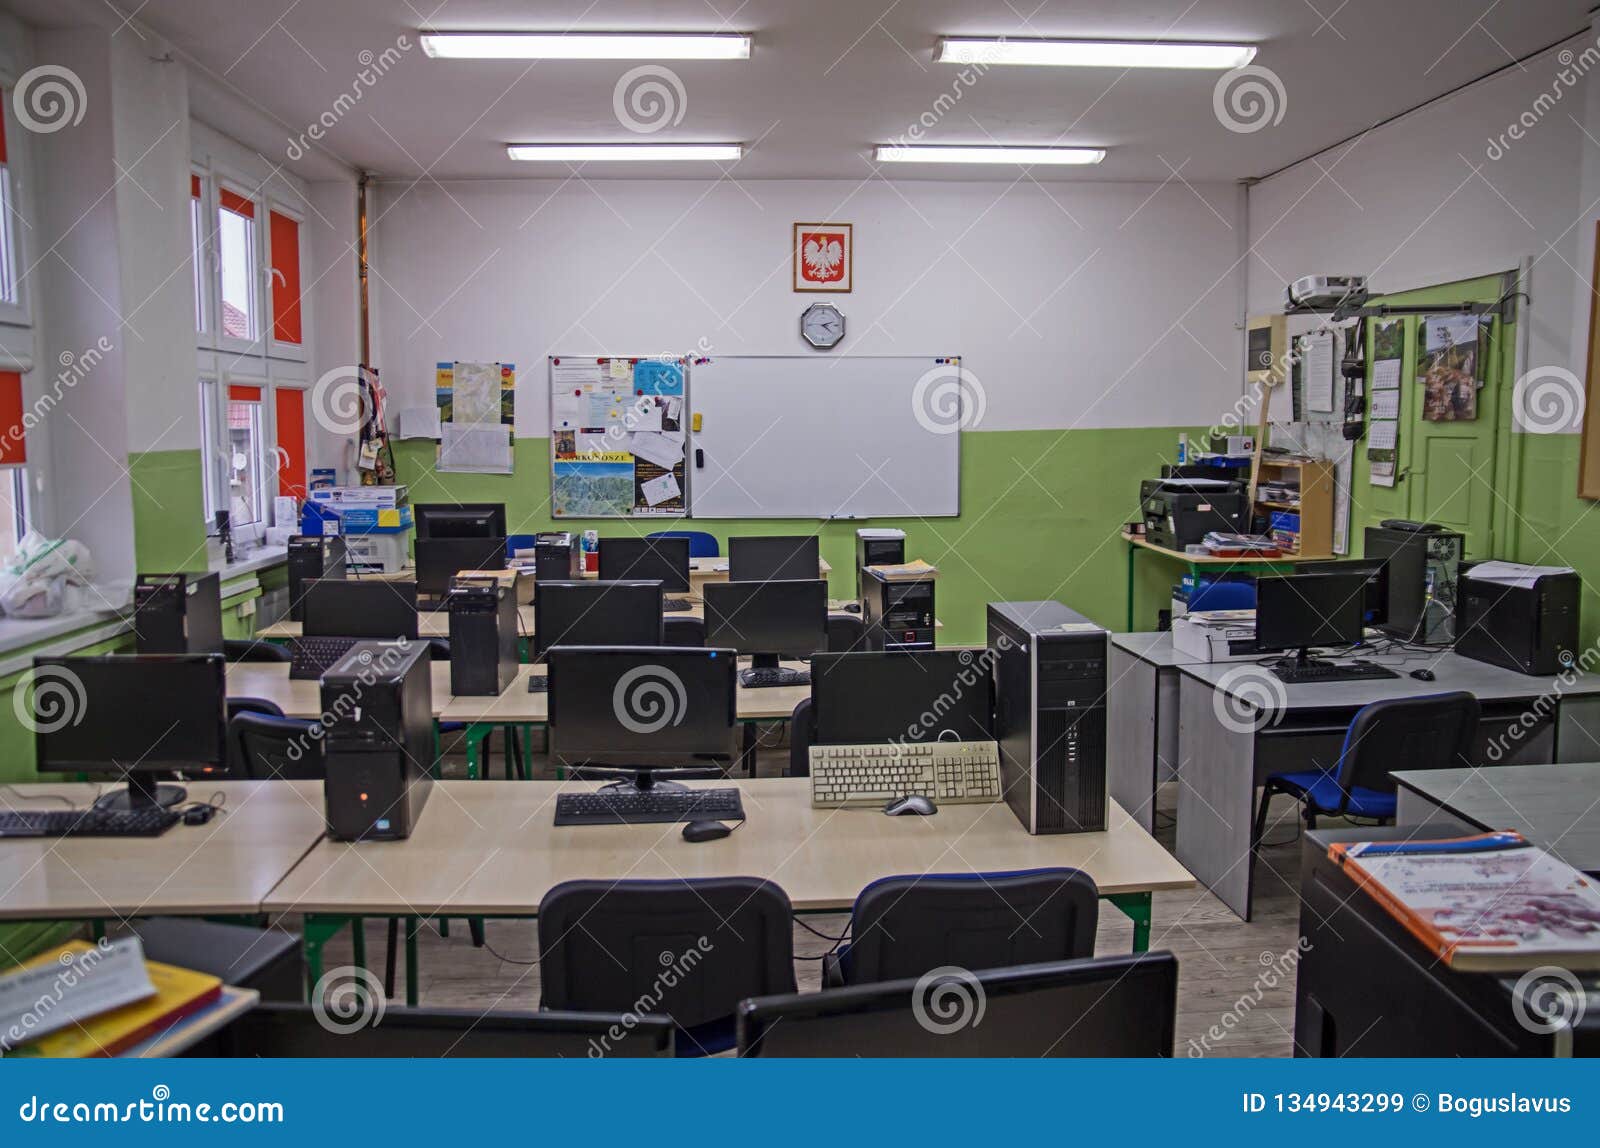 School office. editorial stock image. Image of class - 134943299